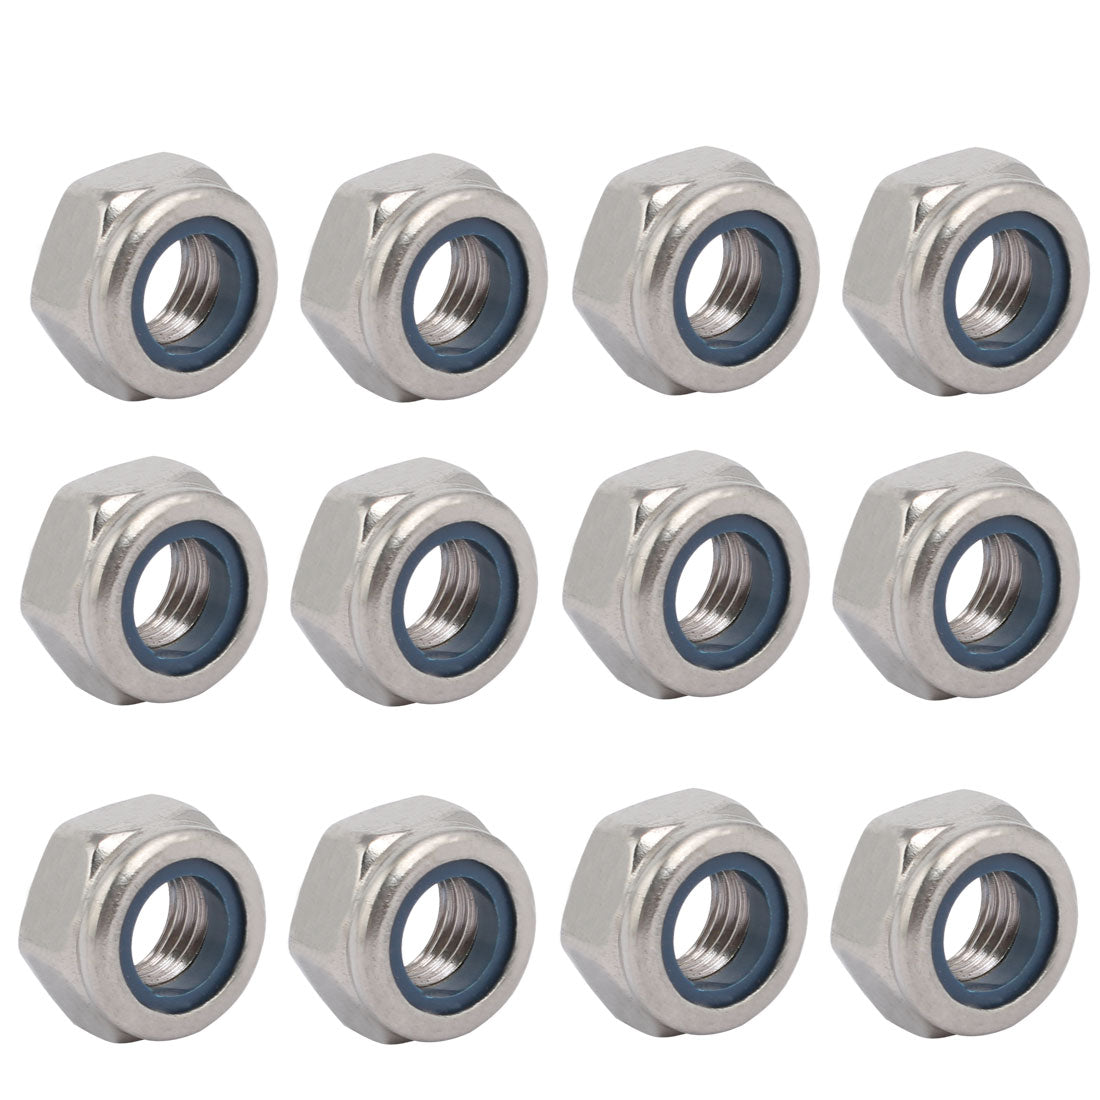 uxcell Uxcell 12pcs M10 x 1.25mm Pitch Metric Fine Thread 304 Stainless Steel Hex Lock Nuts